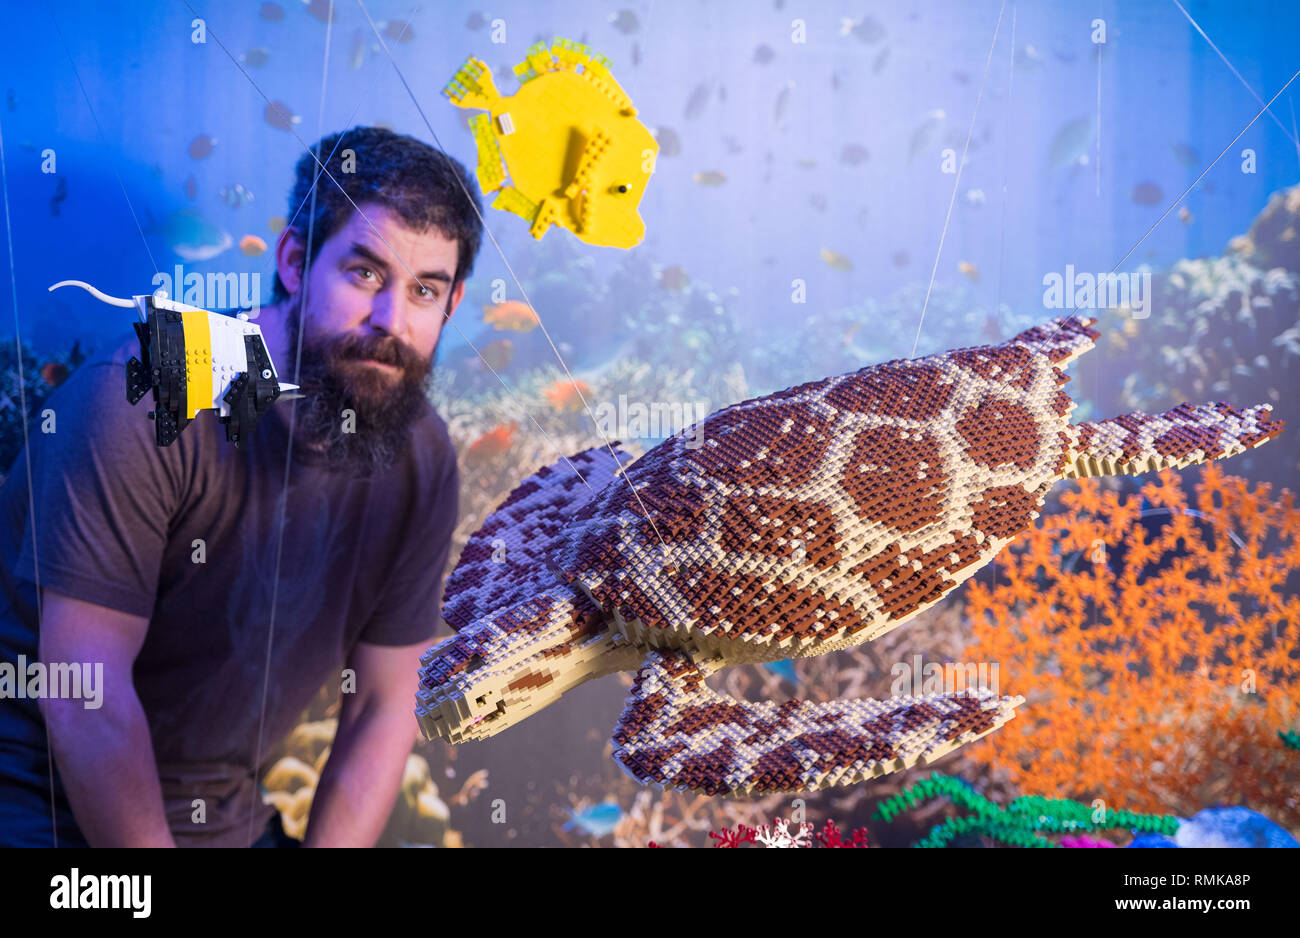 Technician Phil Sofer with a Lego brick model showing a scene from the Great Barrier Reef, made from 200,000 Lego bricks, part of the 'Brick Wonders' exhibition, which opens at the Horniman Museum, in south London, on February 16th. Stock Photo